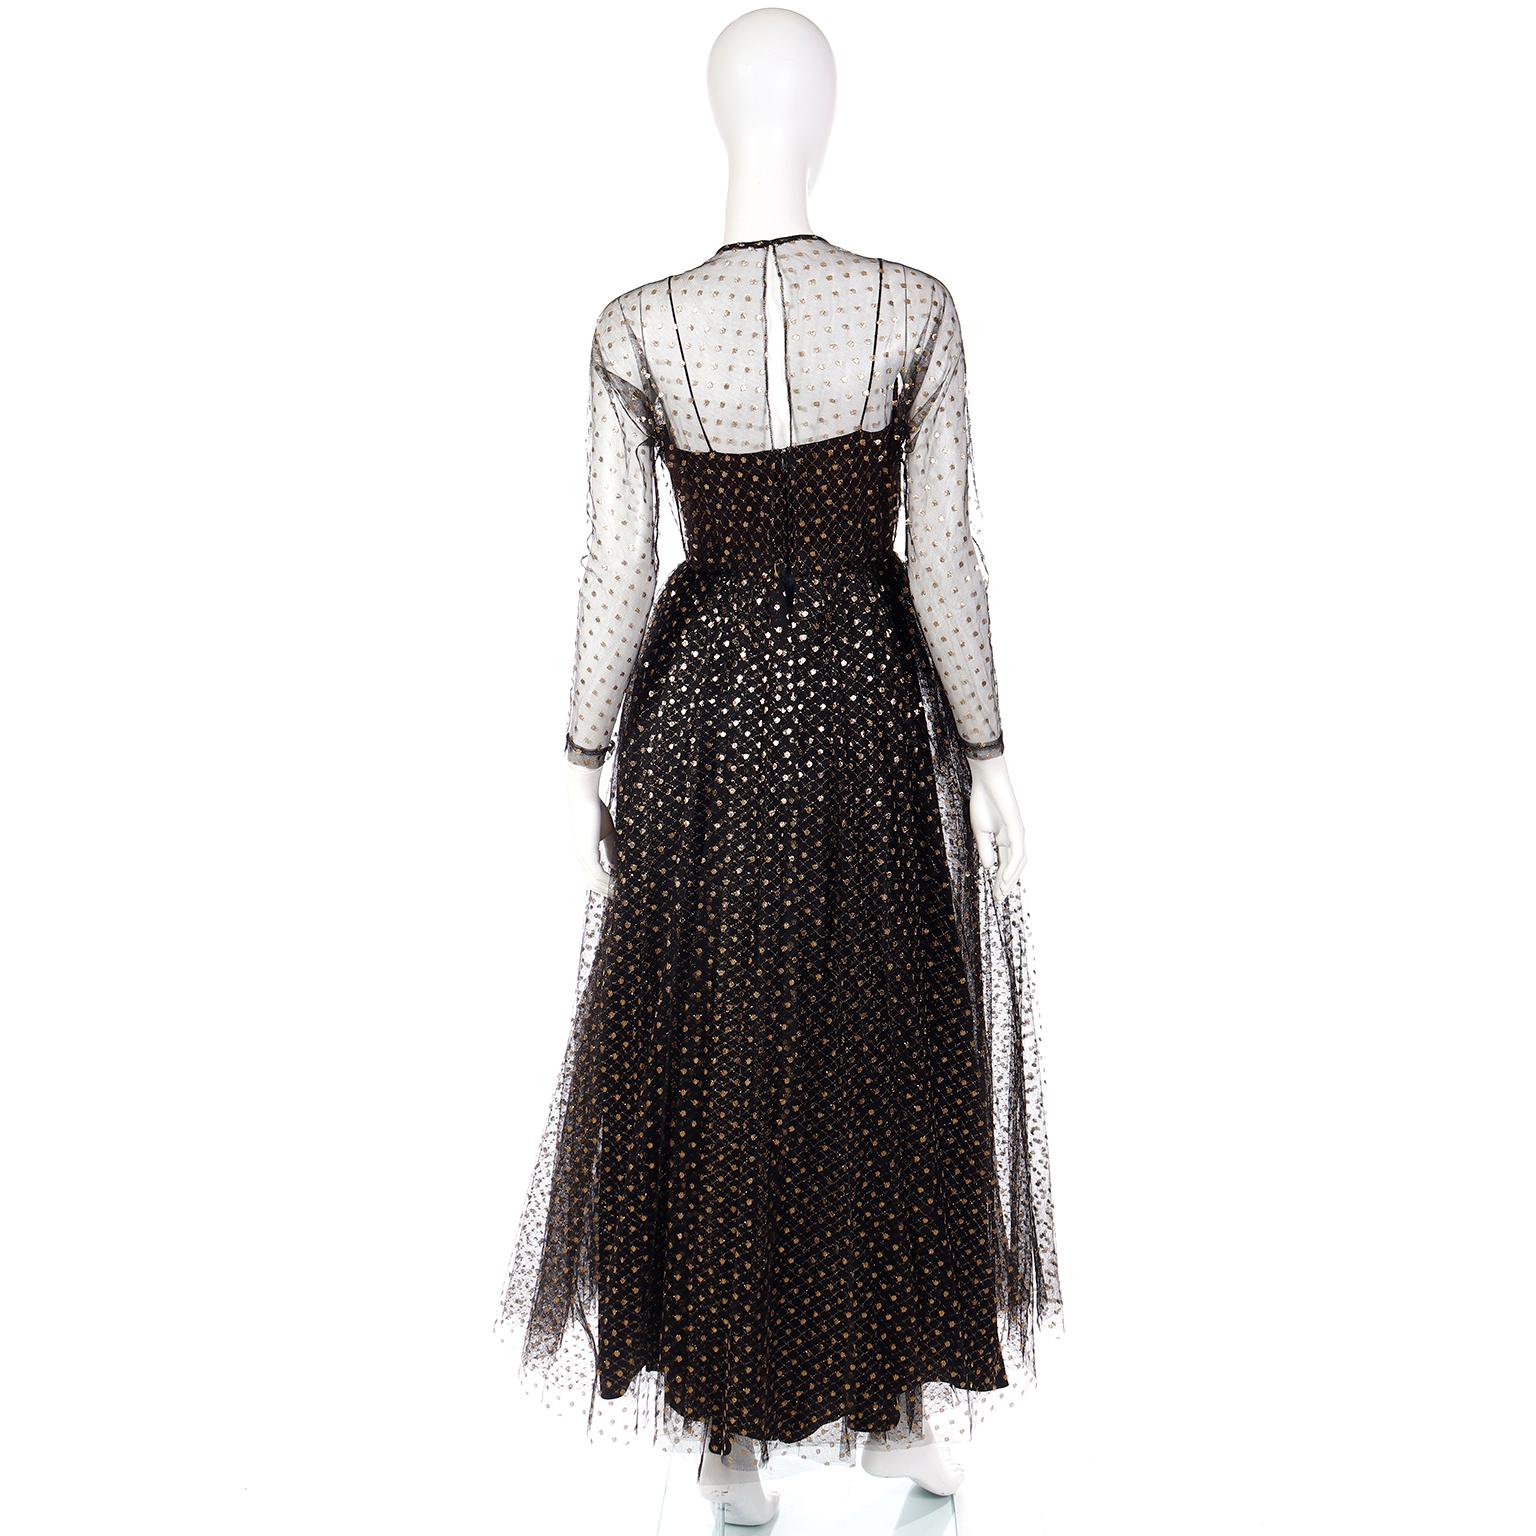 Vintage Lillie Rubin 1970s Black Tulle Dress With Gold Dots In Excellent Condition For Sale In Portland, OR